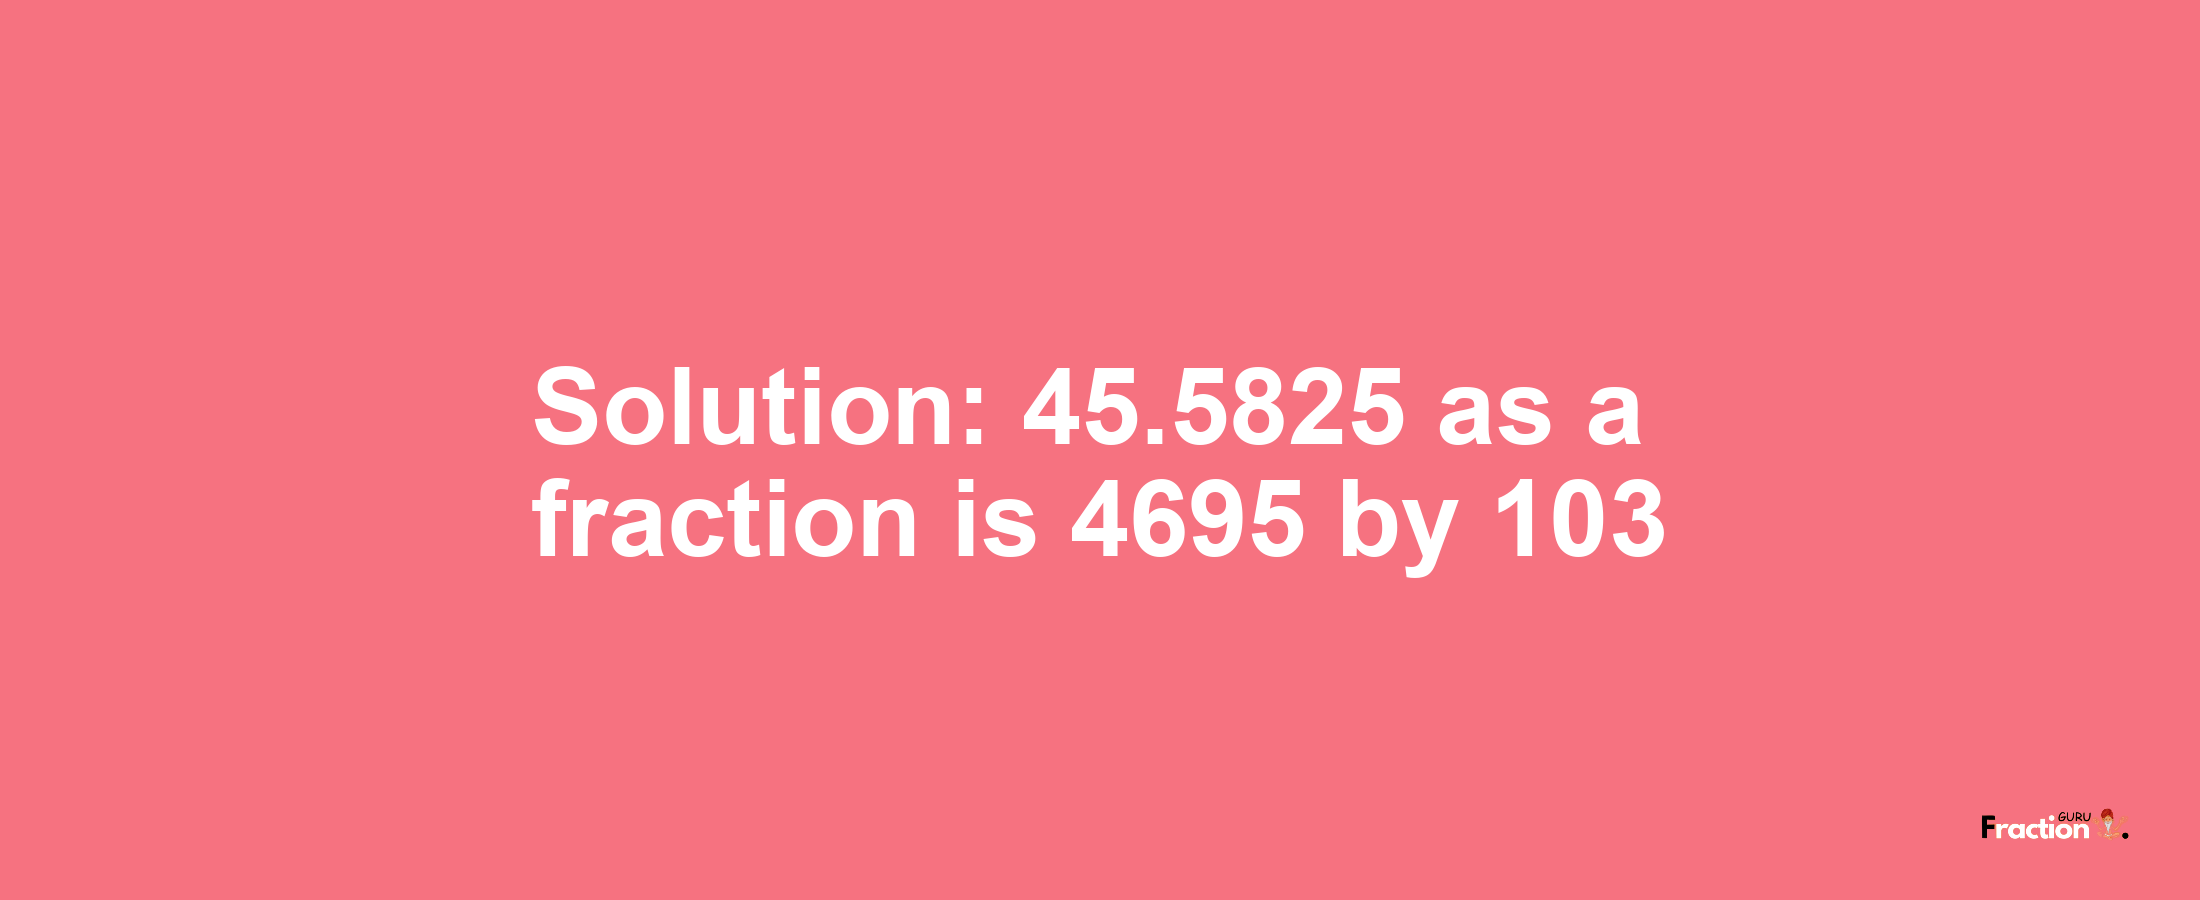 Solution:45.5825 as a fraction is 4695/103